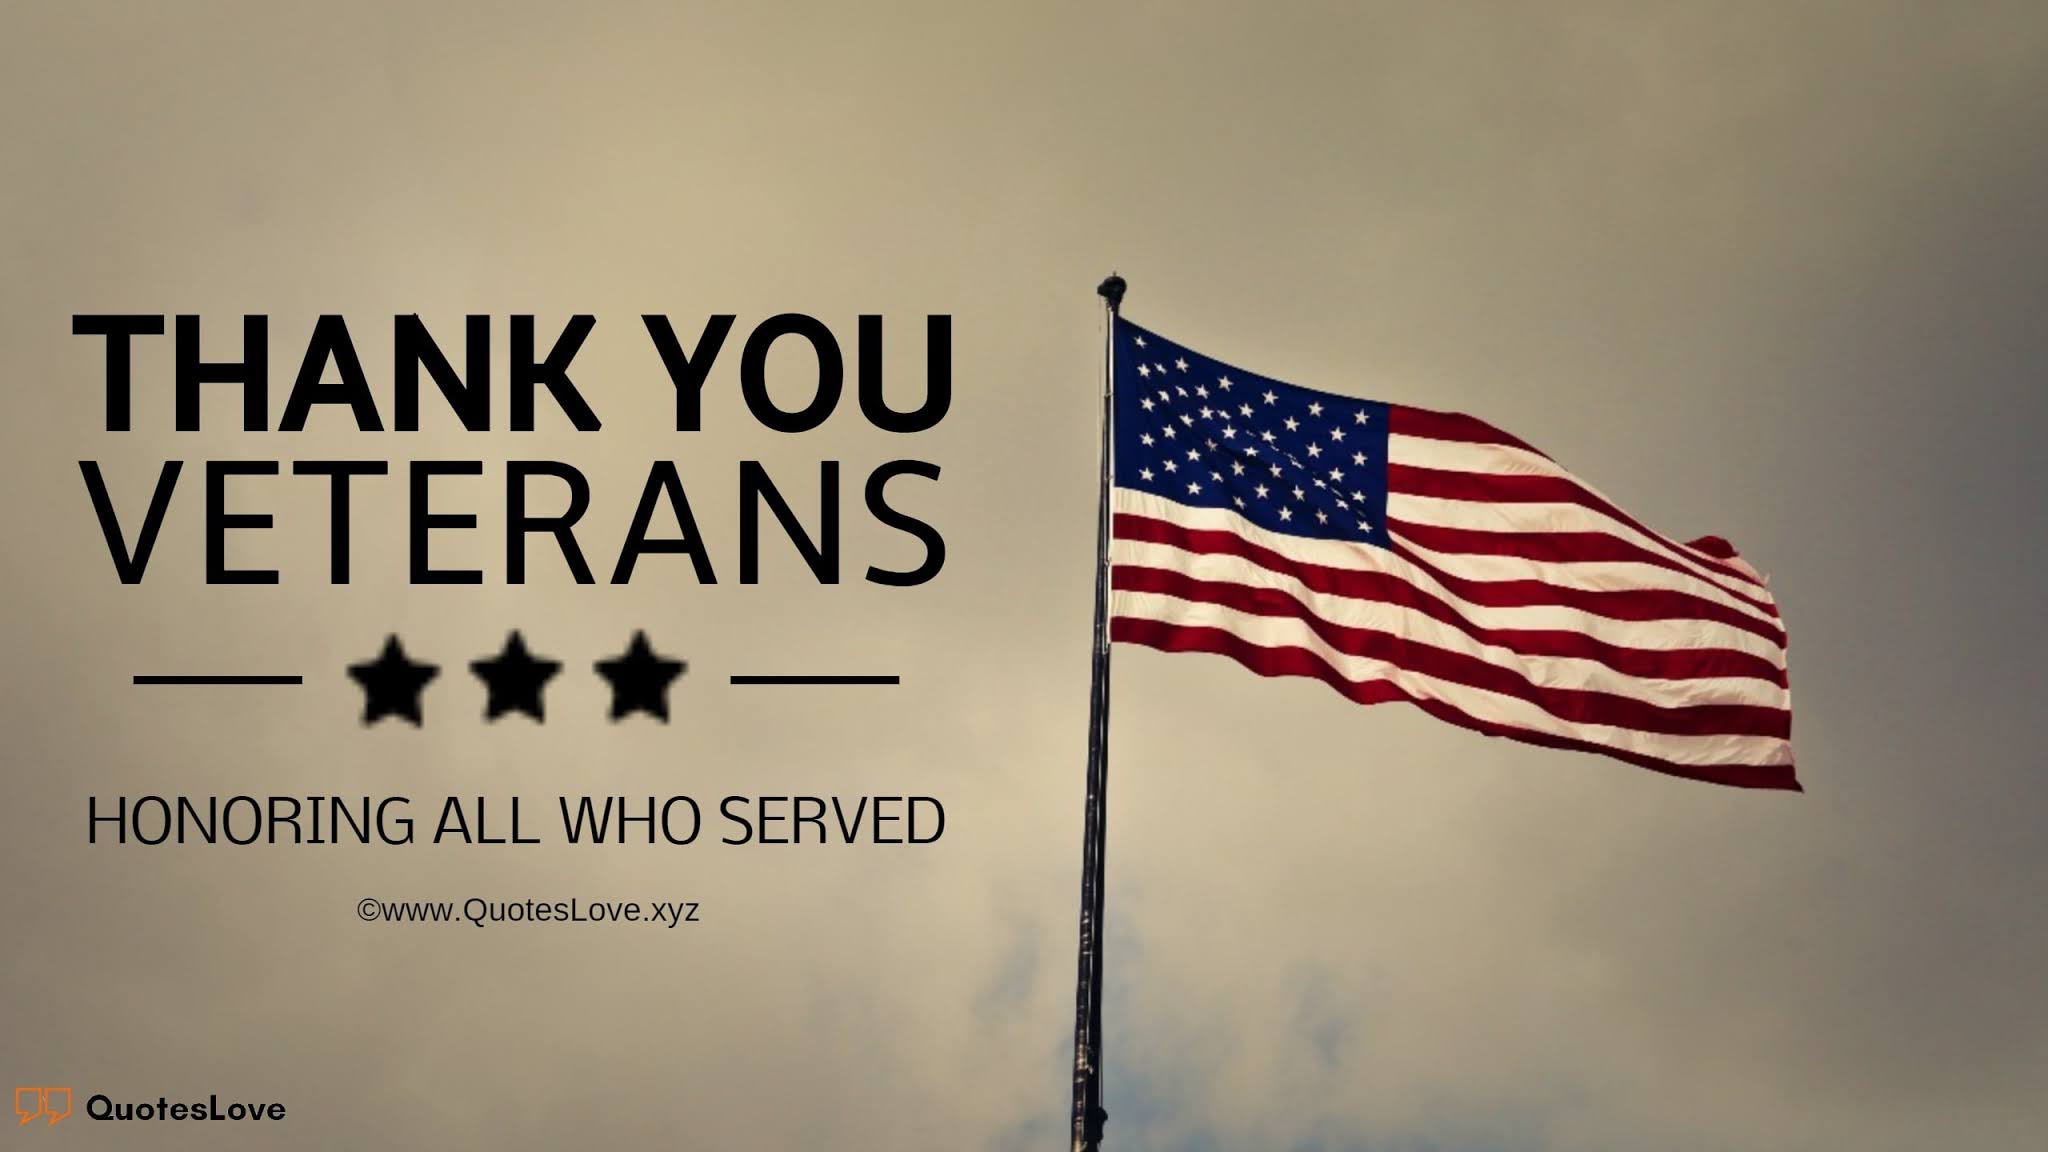 Veterans Day Quotes, Sayings, Slogans, Wishes, Greetings, Messages, Images, Poster, Pictures, Photos